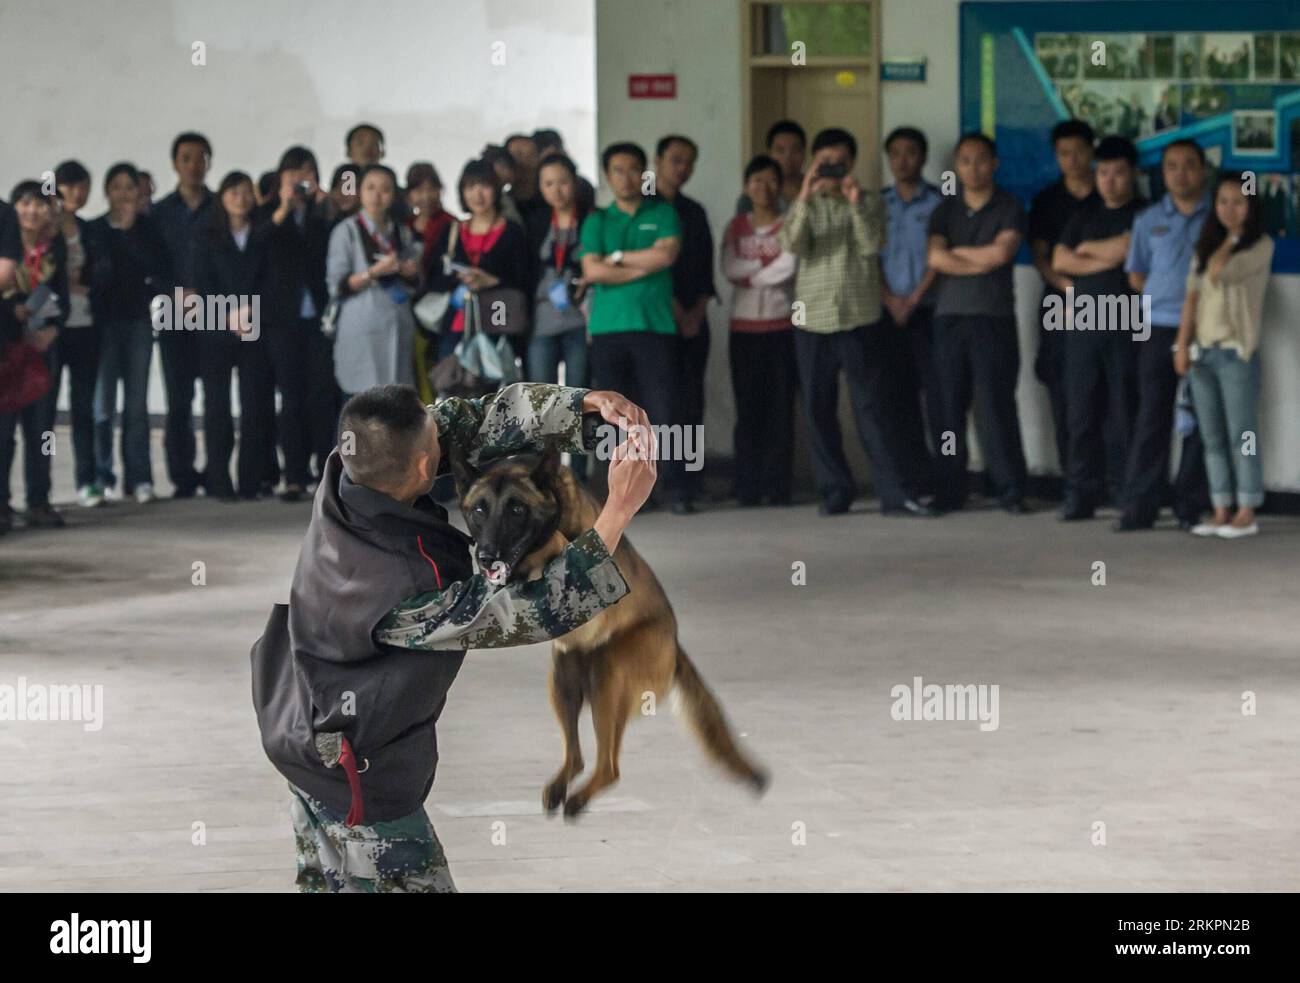 Bildnummer: 58030738  Datum: 24.05.2012  Copyright: imago/Xinhua (120524) -- CHONGQING, May 24, 2012 (Xinhua) -- Citizens watch a skill show of police dogs at the tracker dog base of the Municipal Public Security Bureau in Chongqing, southwest China, May 24, 2012. More than 30 citizens were invited to visit the base on Thursday. (Xinhua/Chen Cheng)(mcg) CHINA-CHONGQING-TRACKER DOG BASE (CN) PUBLICATIONxNOTxINxCHN Gesellschaft Polizei Polizeihund Ausbildung x0x xkg 2012 quer      58030738 Date 24 05 2012 Copyright Imago XINHUA  Chongqing May 24 2012 XINHUA Citizens Watch a Skill Show of Police Stock Photo